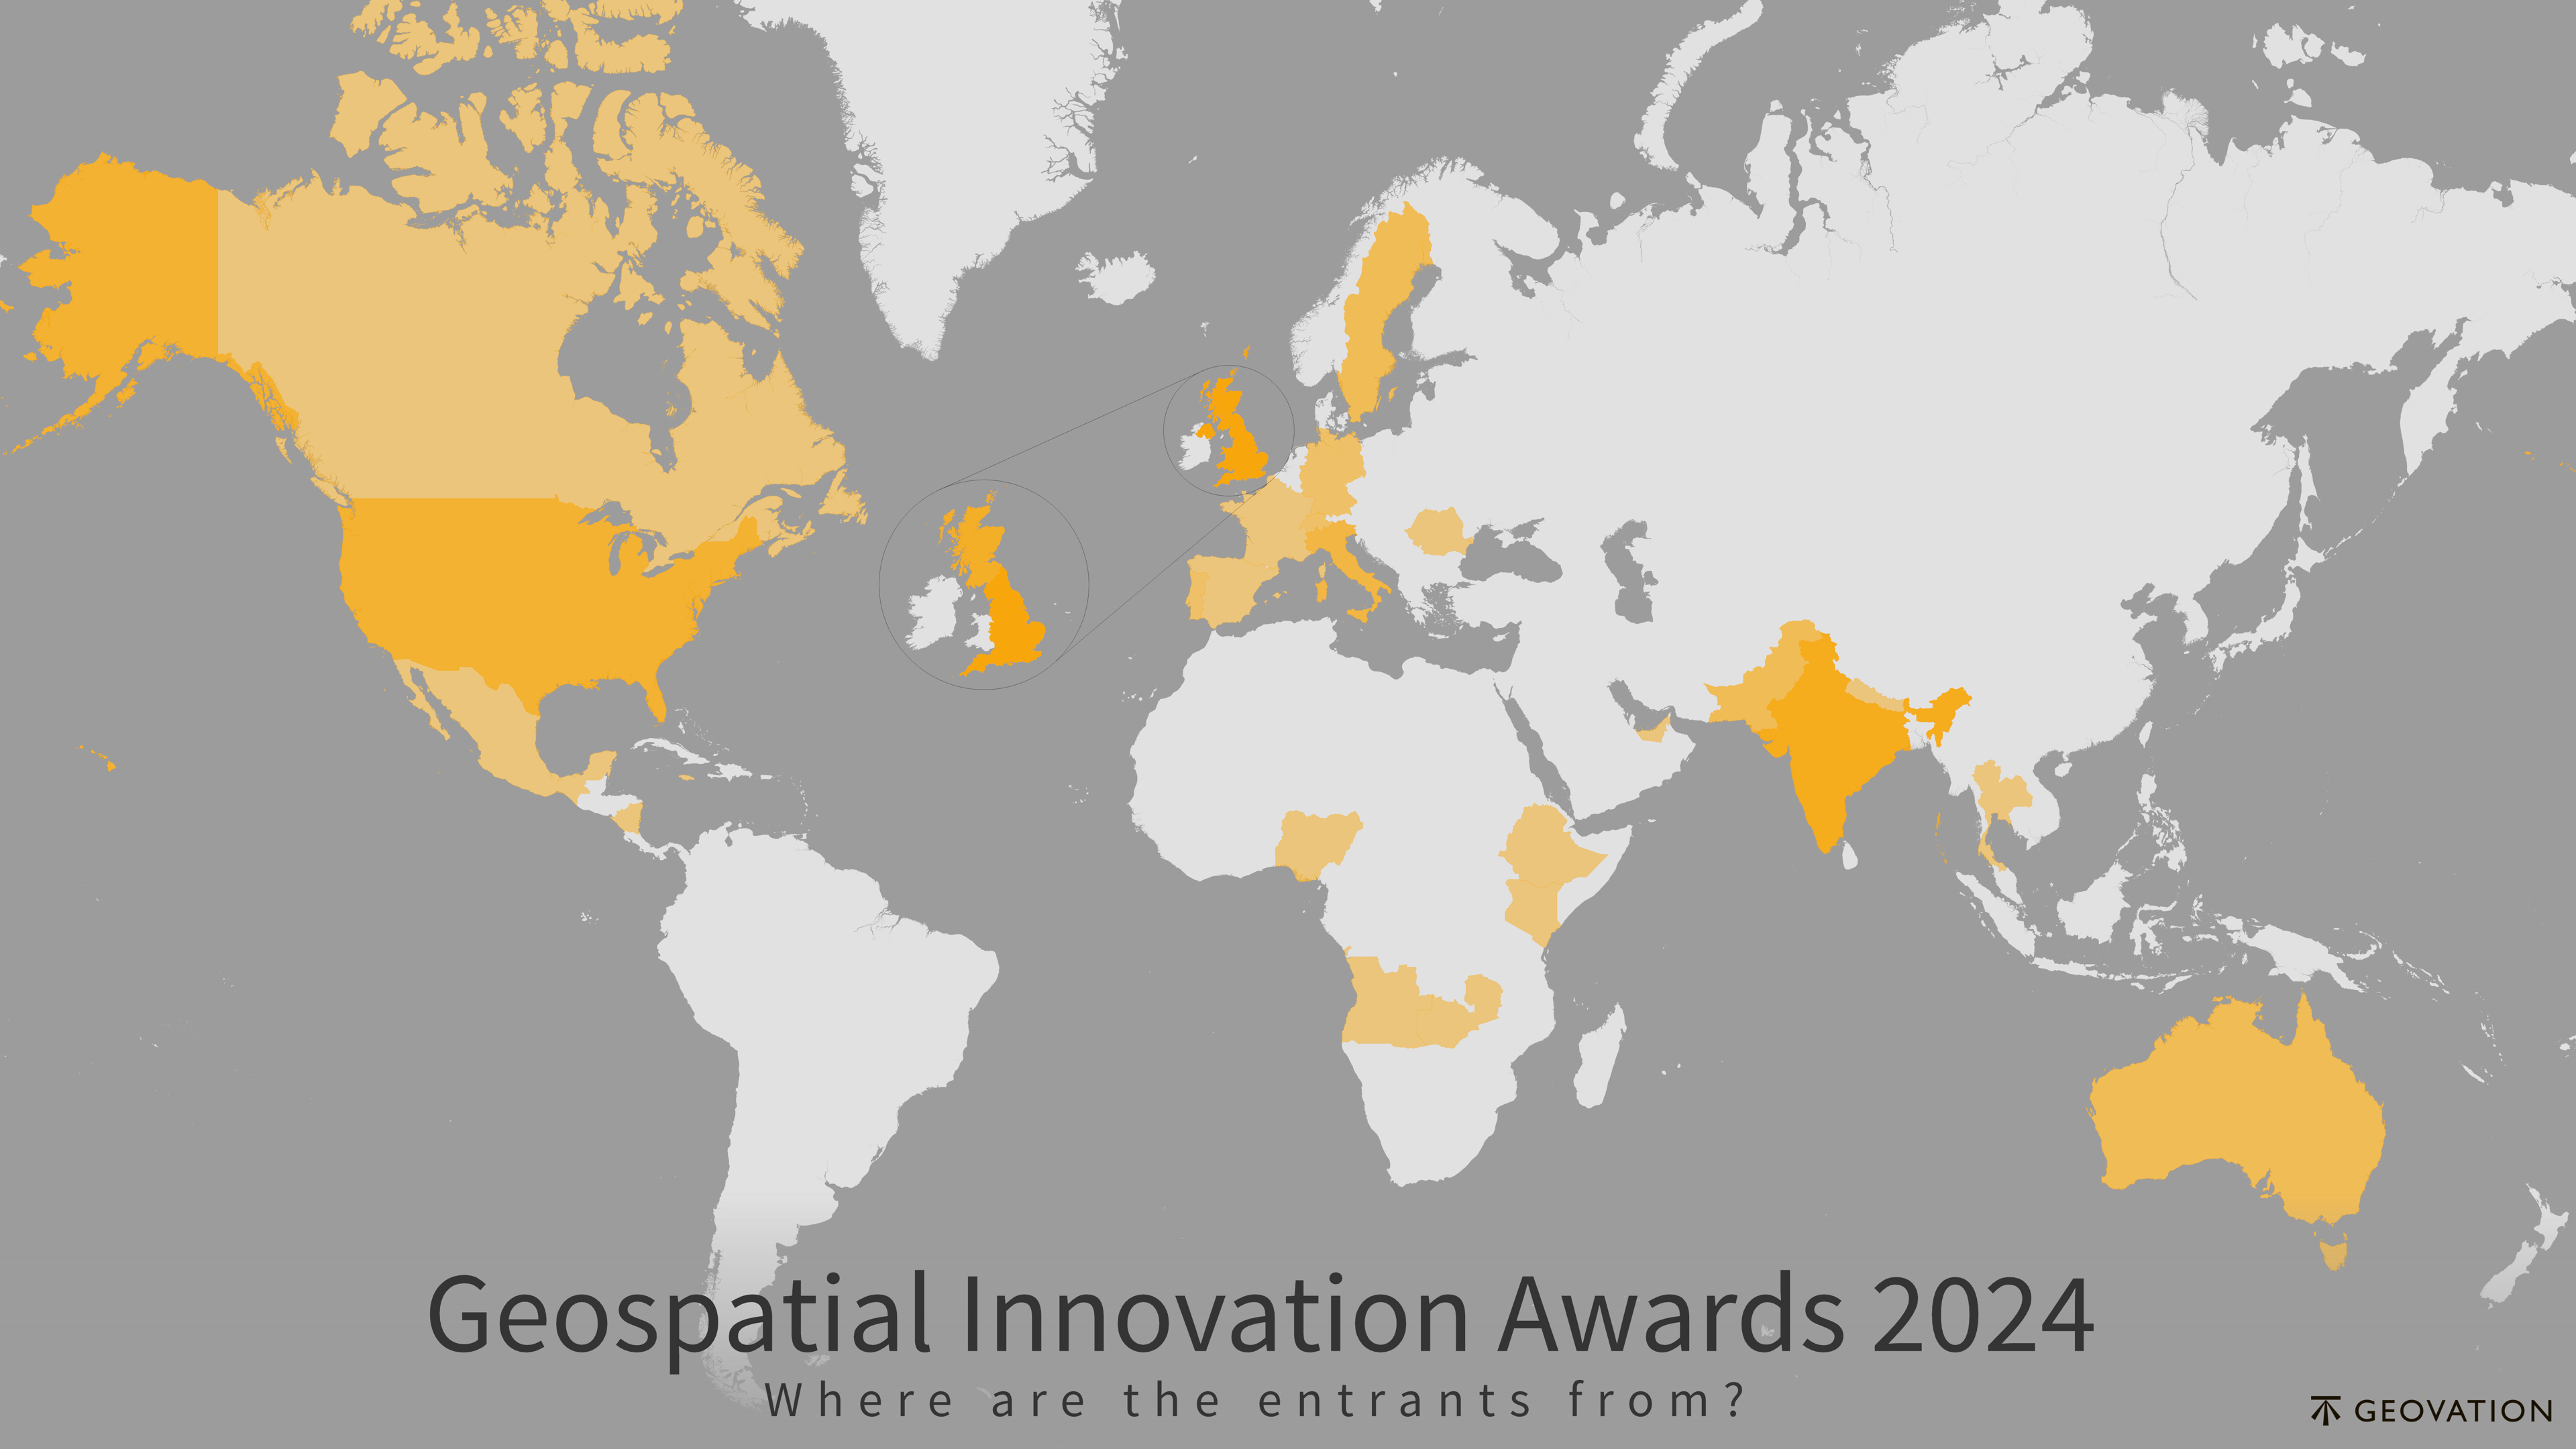 Map showing the global reach of the entrants for this year's awards